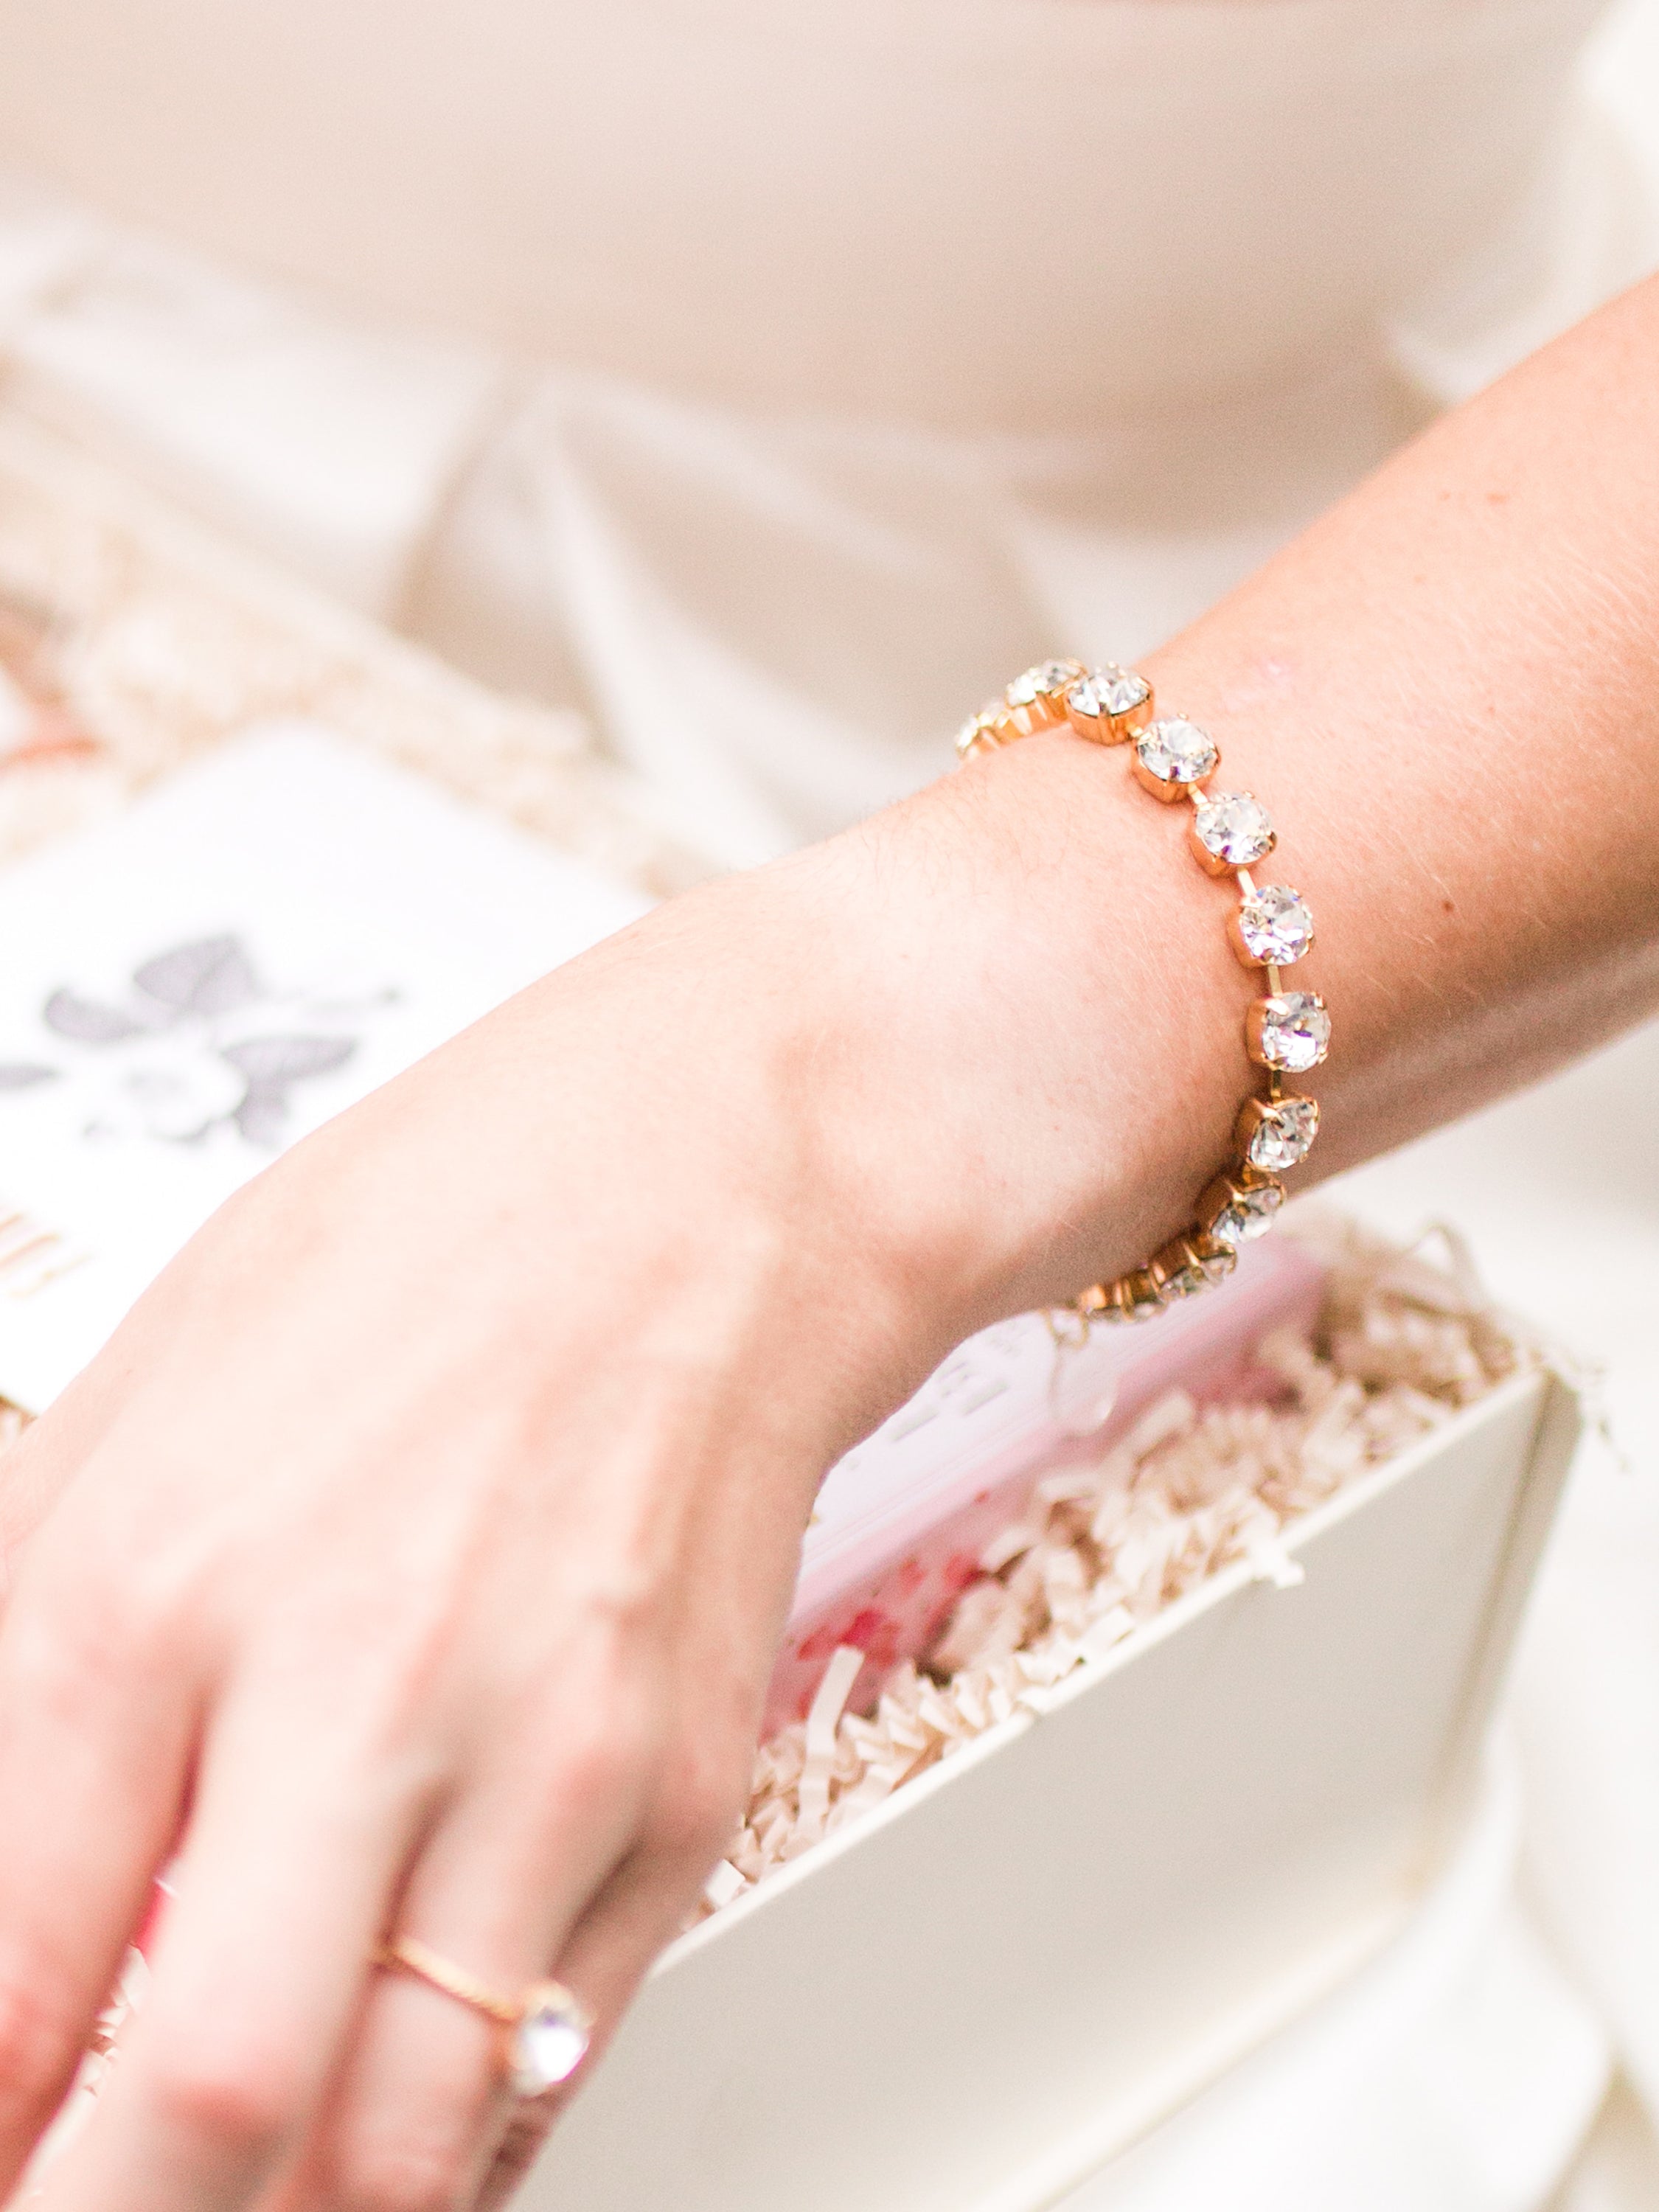  Sparkling Stars Bracelet, jewelry designed and made by Sarah Gauci in Malta. 8mm Crystals. 16K gold plated, Rose Gold or silver plated.